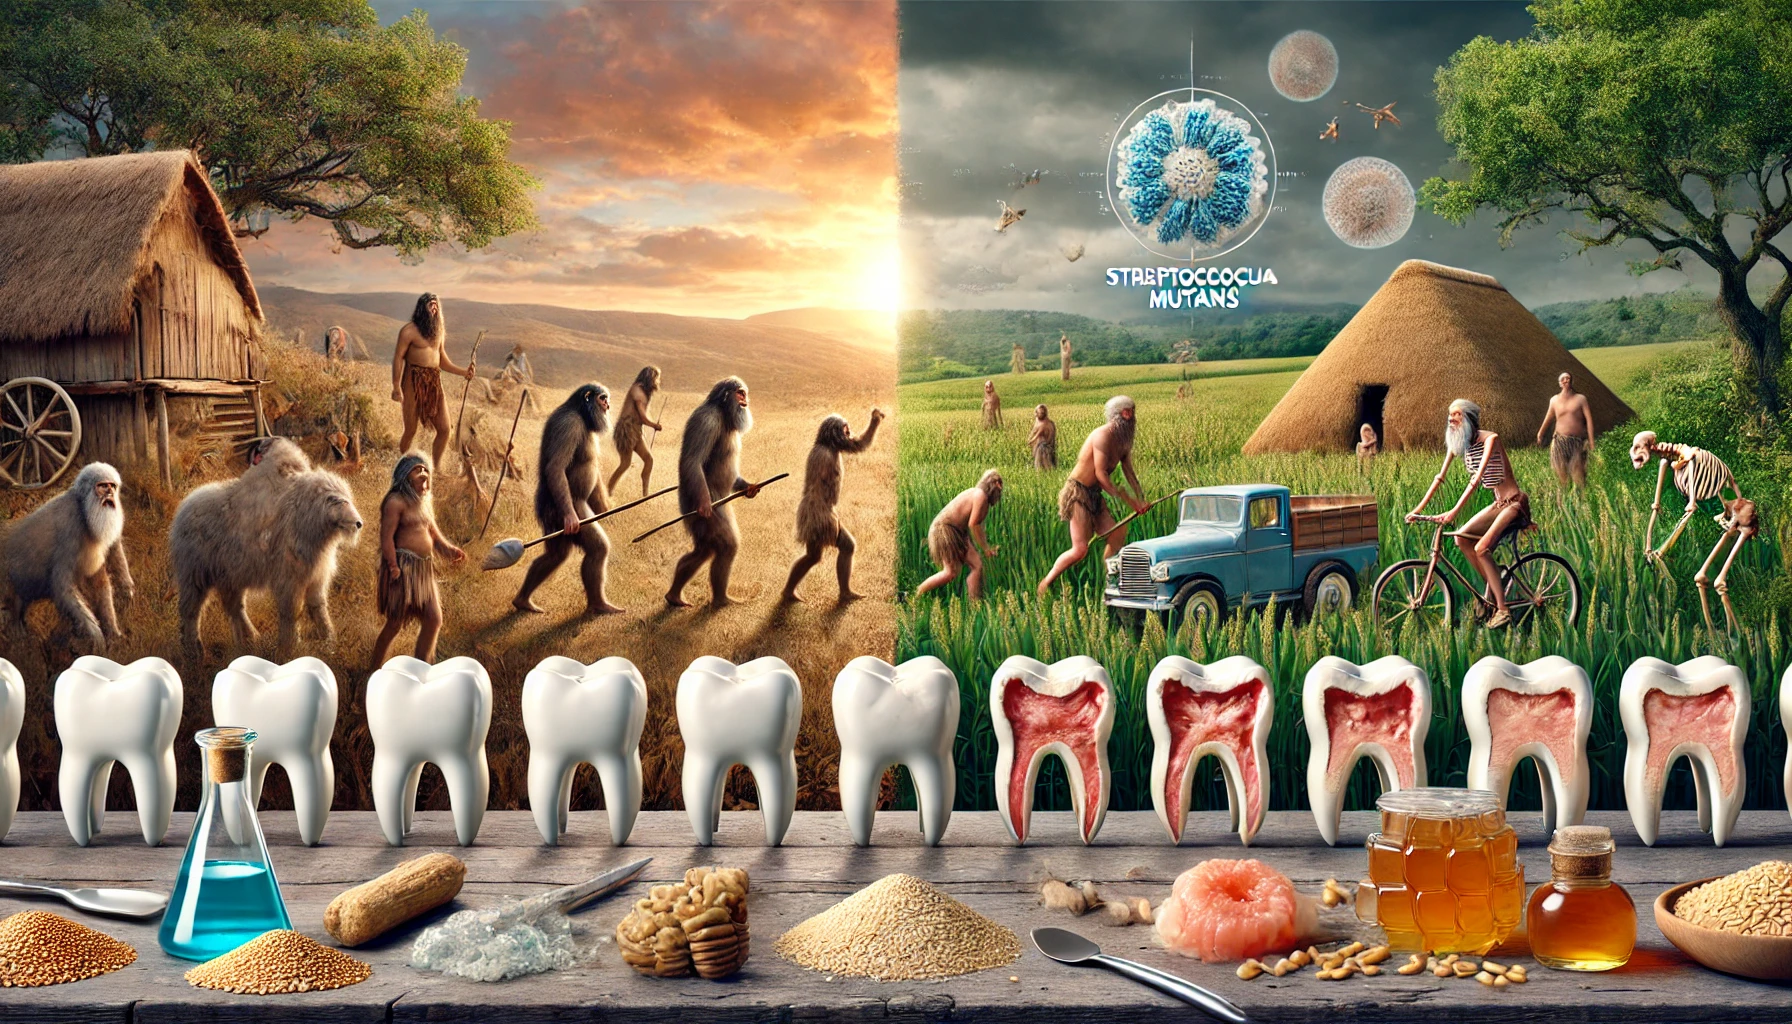 Worried About Your Oral Health It Began with Agriculture!